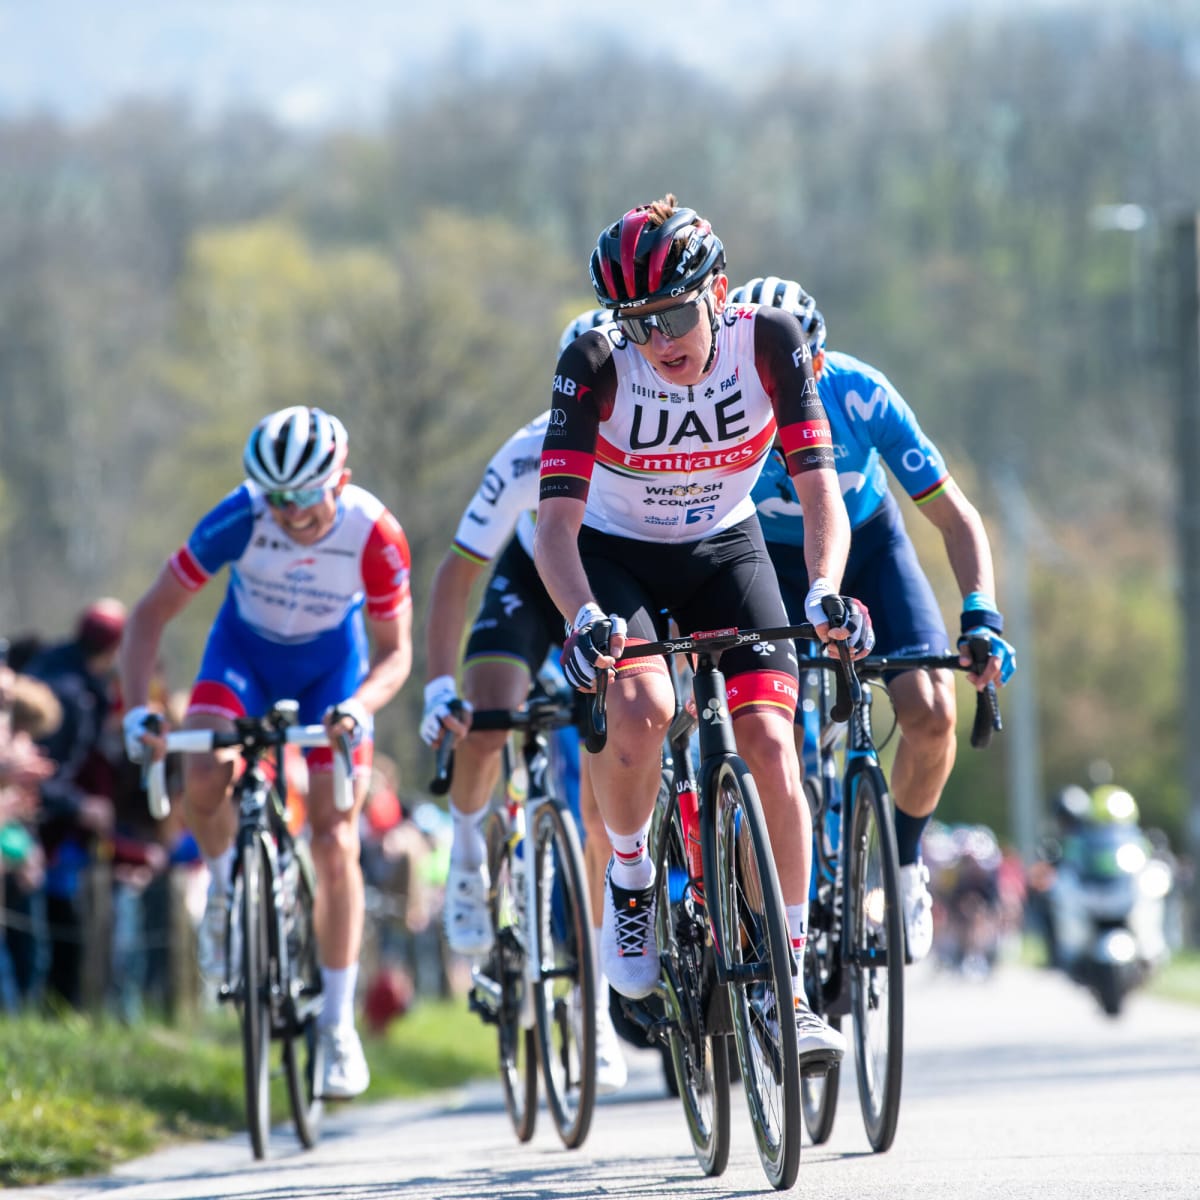 Liège-Bastogne-Liège Live Stream Watch Cycling Online Free - How to Watch and Stream Major League and College Sports